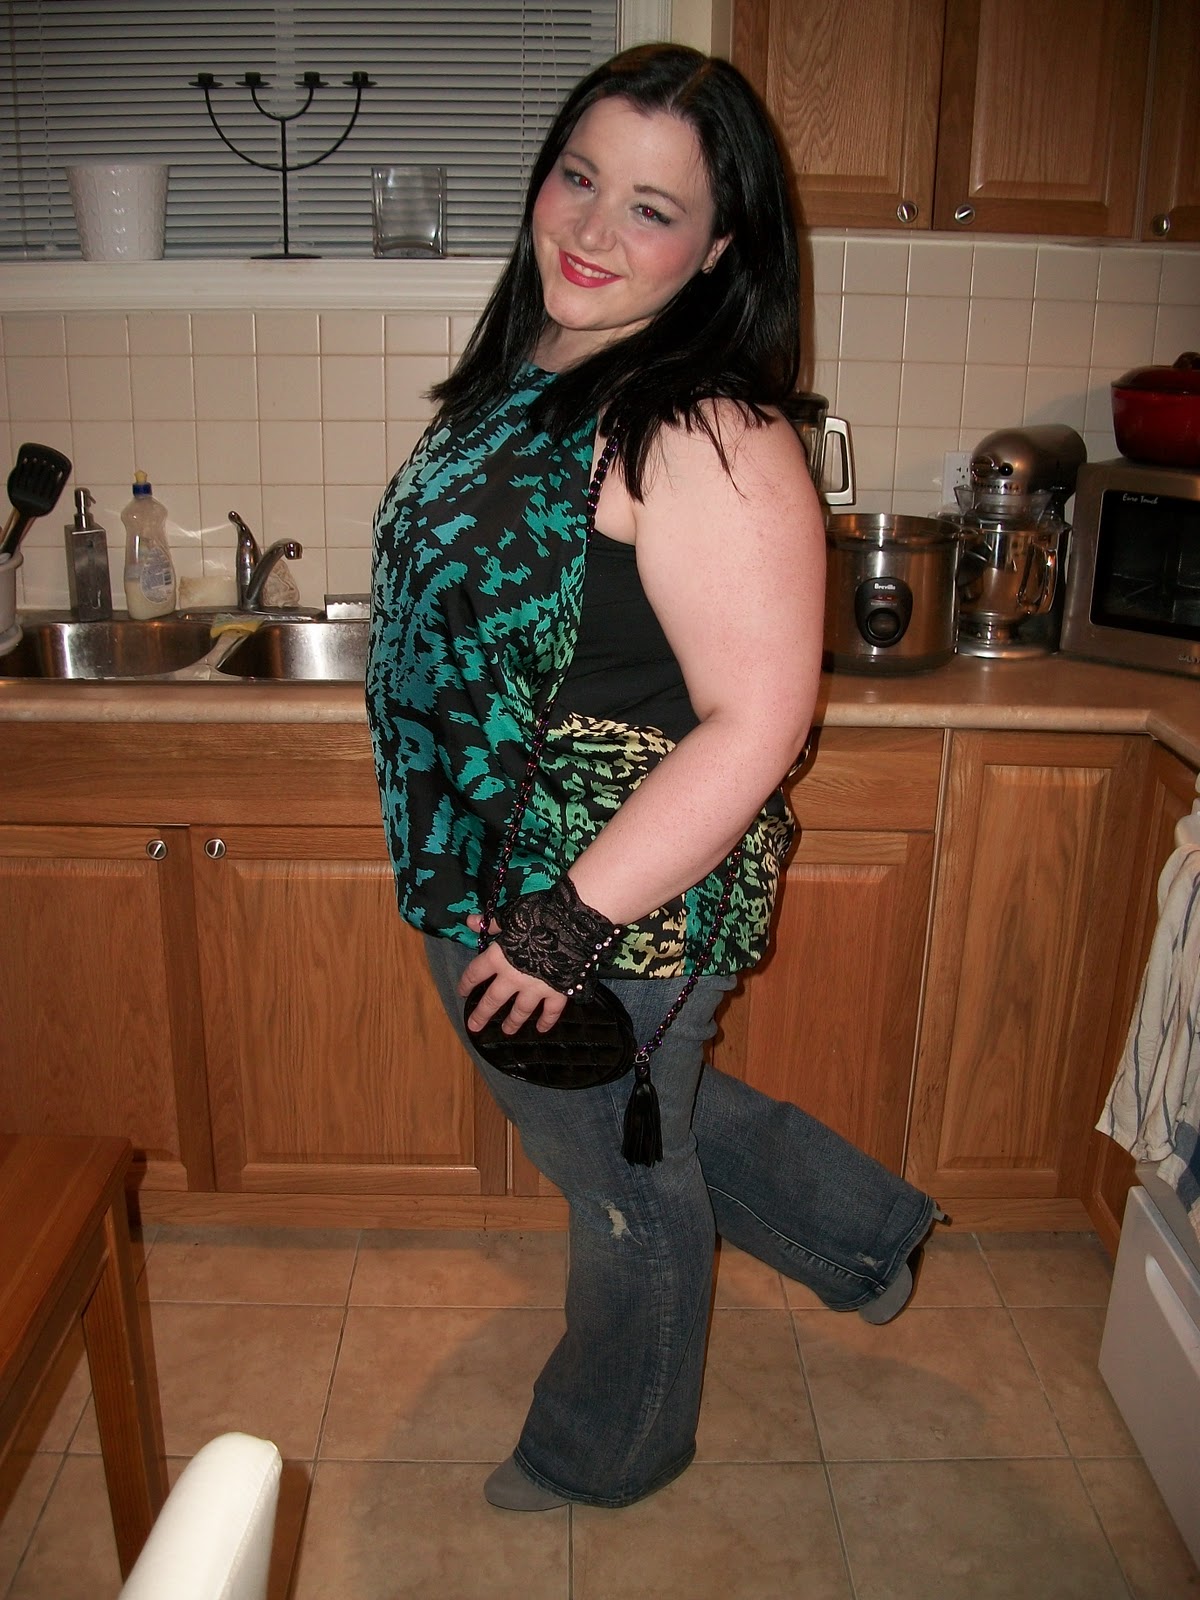 Curvy Canadian Another Plus Size Canadian Outfit For A Night Out With The Ladies